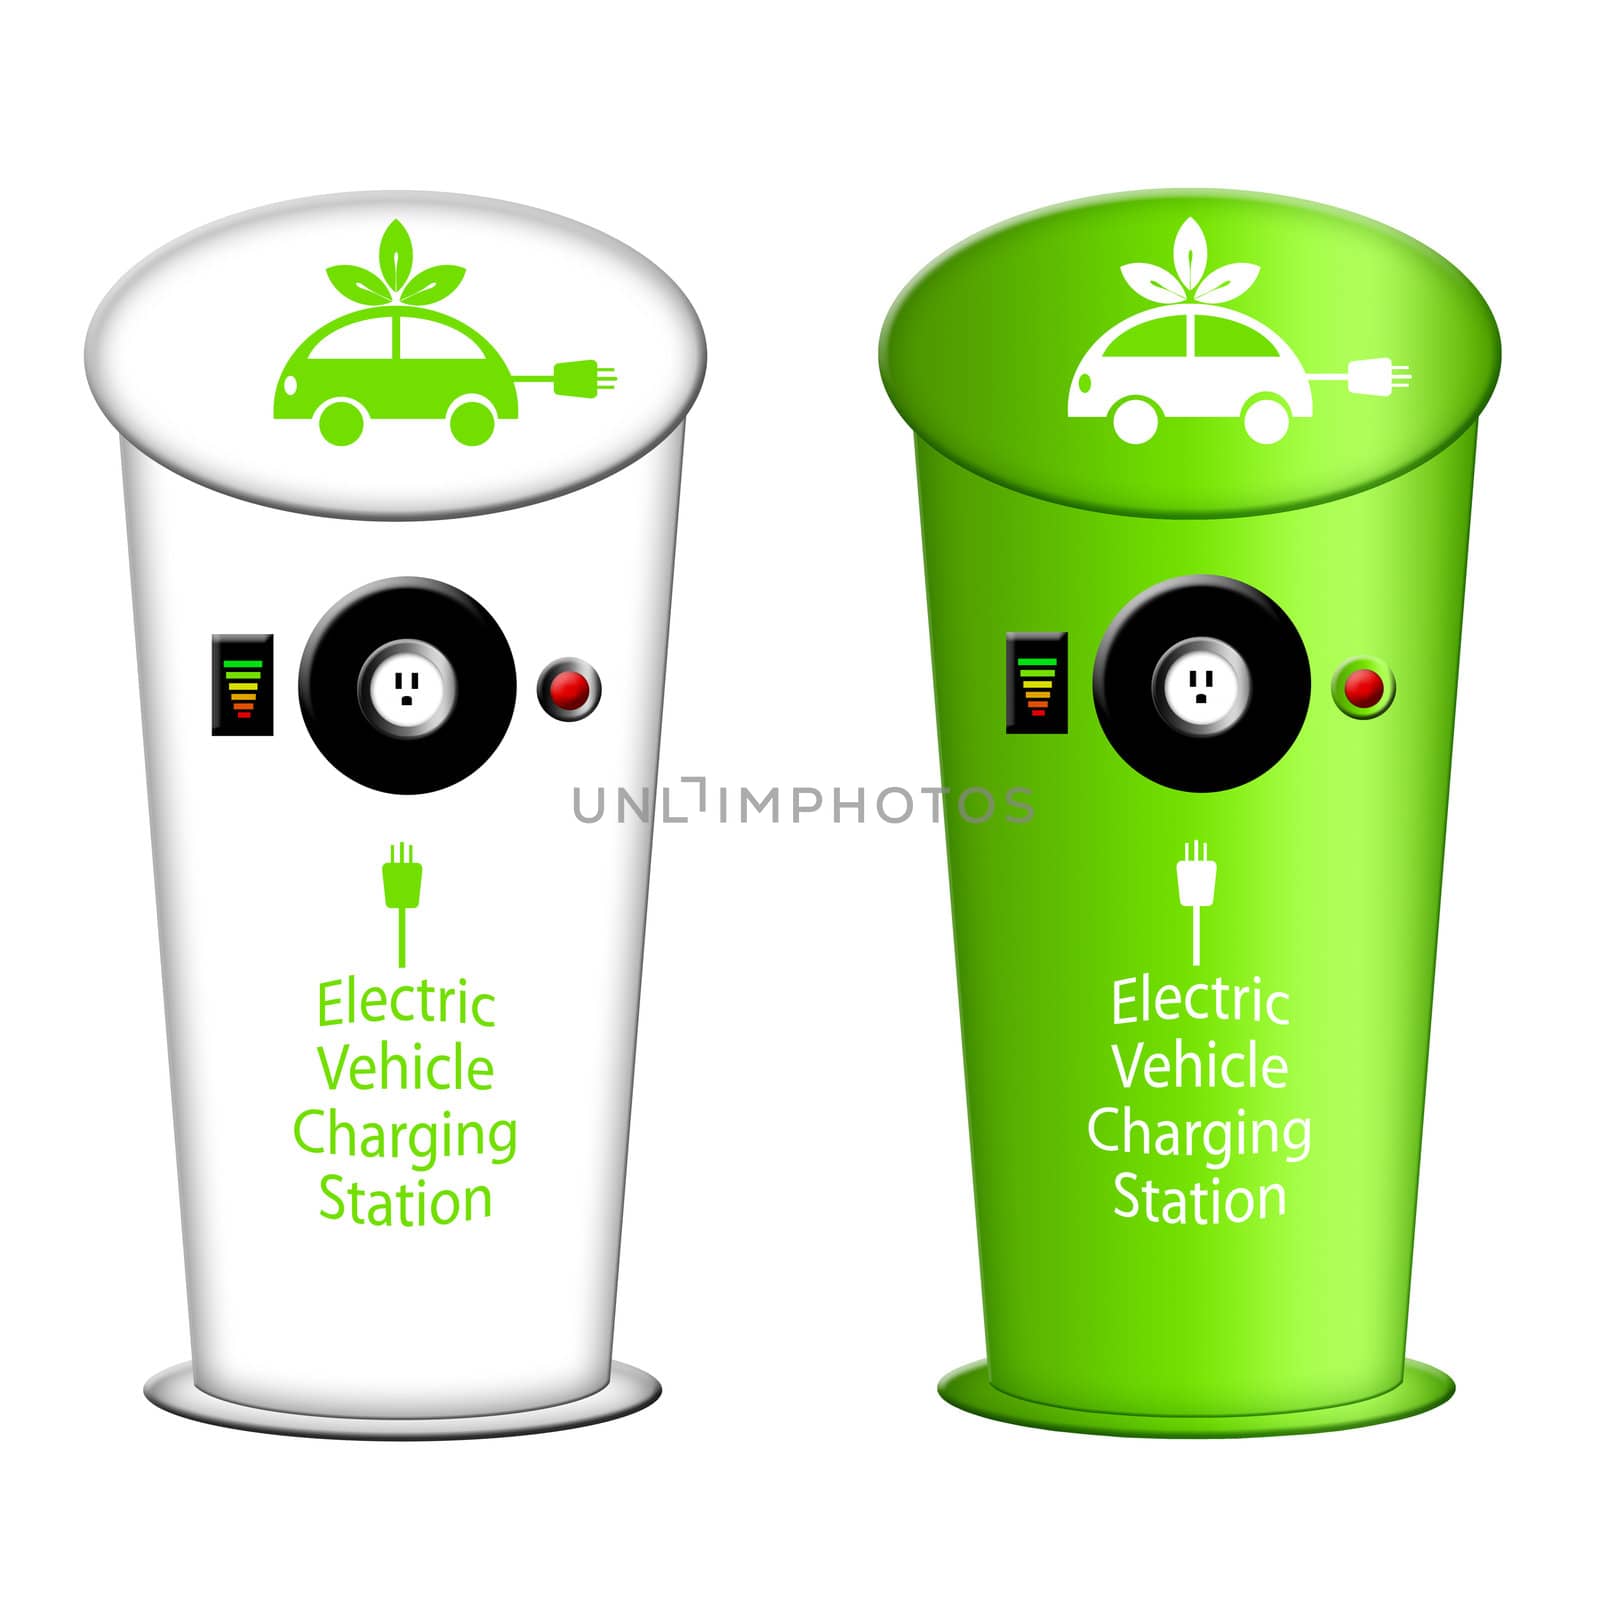 Electric Car Charging Station  with Plug Outlet and Instrument Panels Illustration